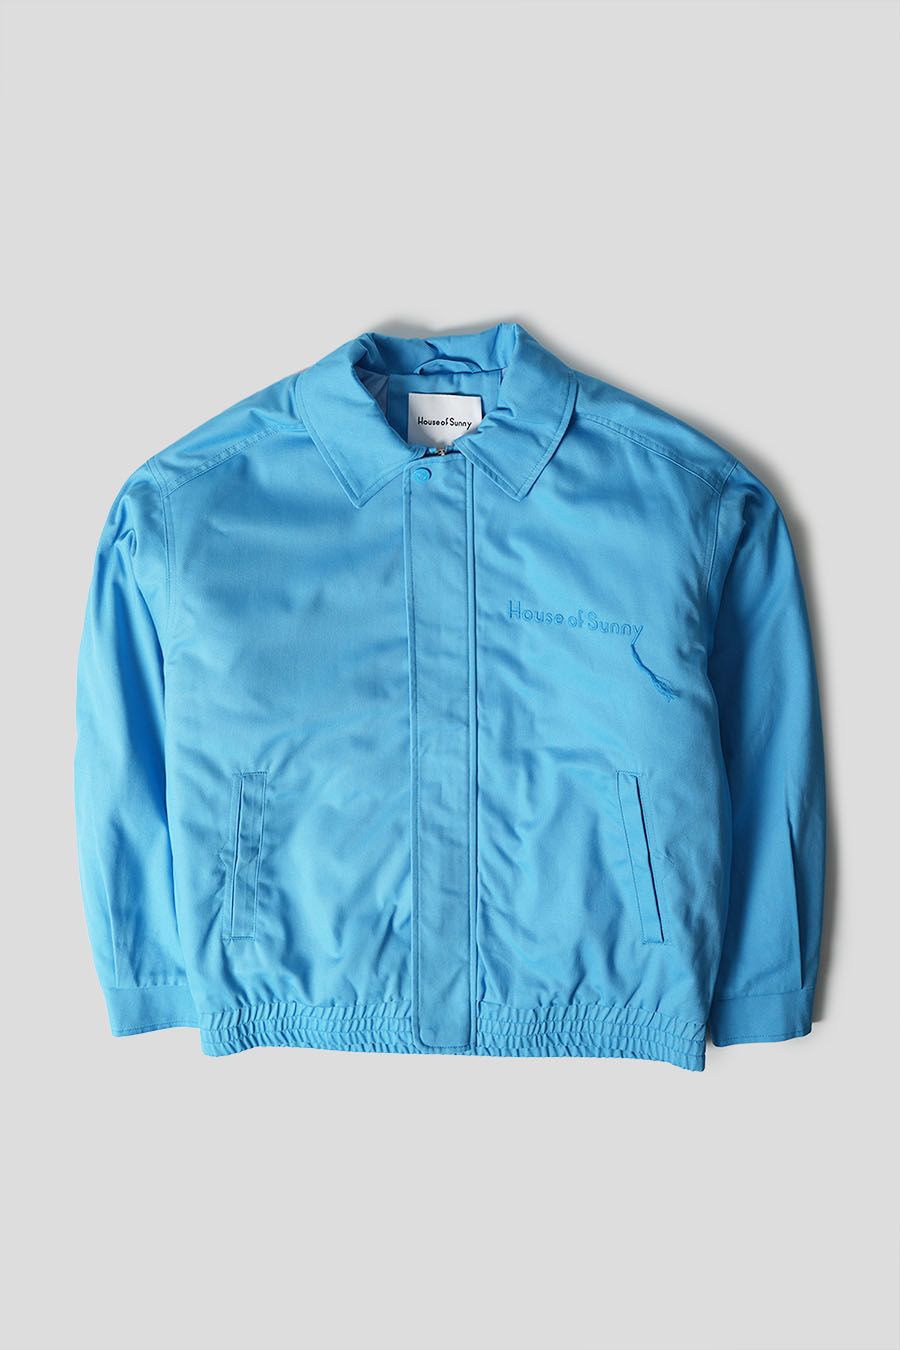 house of sunny - BOMBER DAY TRIPPER CANVAS SKY BLUE - LE LABO STORE